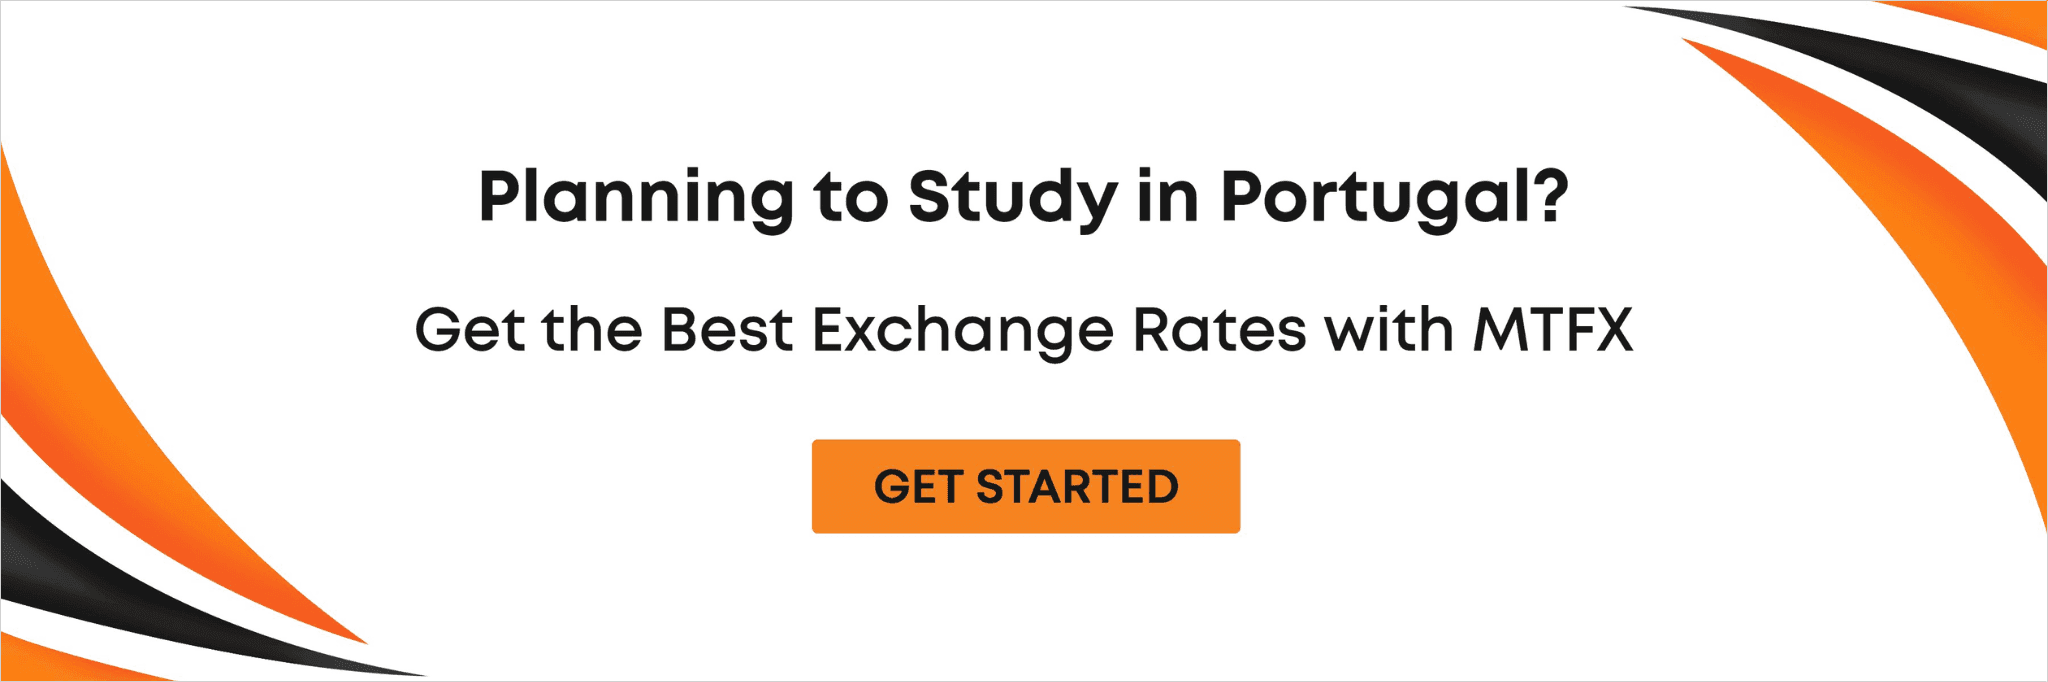 Planning to study in Portugal? Get the best exchange rates with MTFX